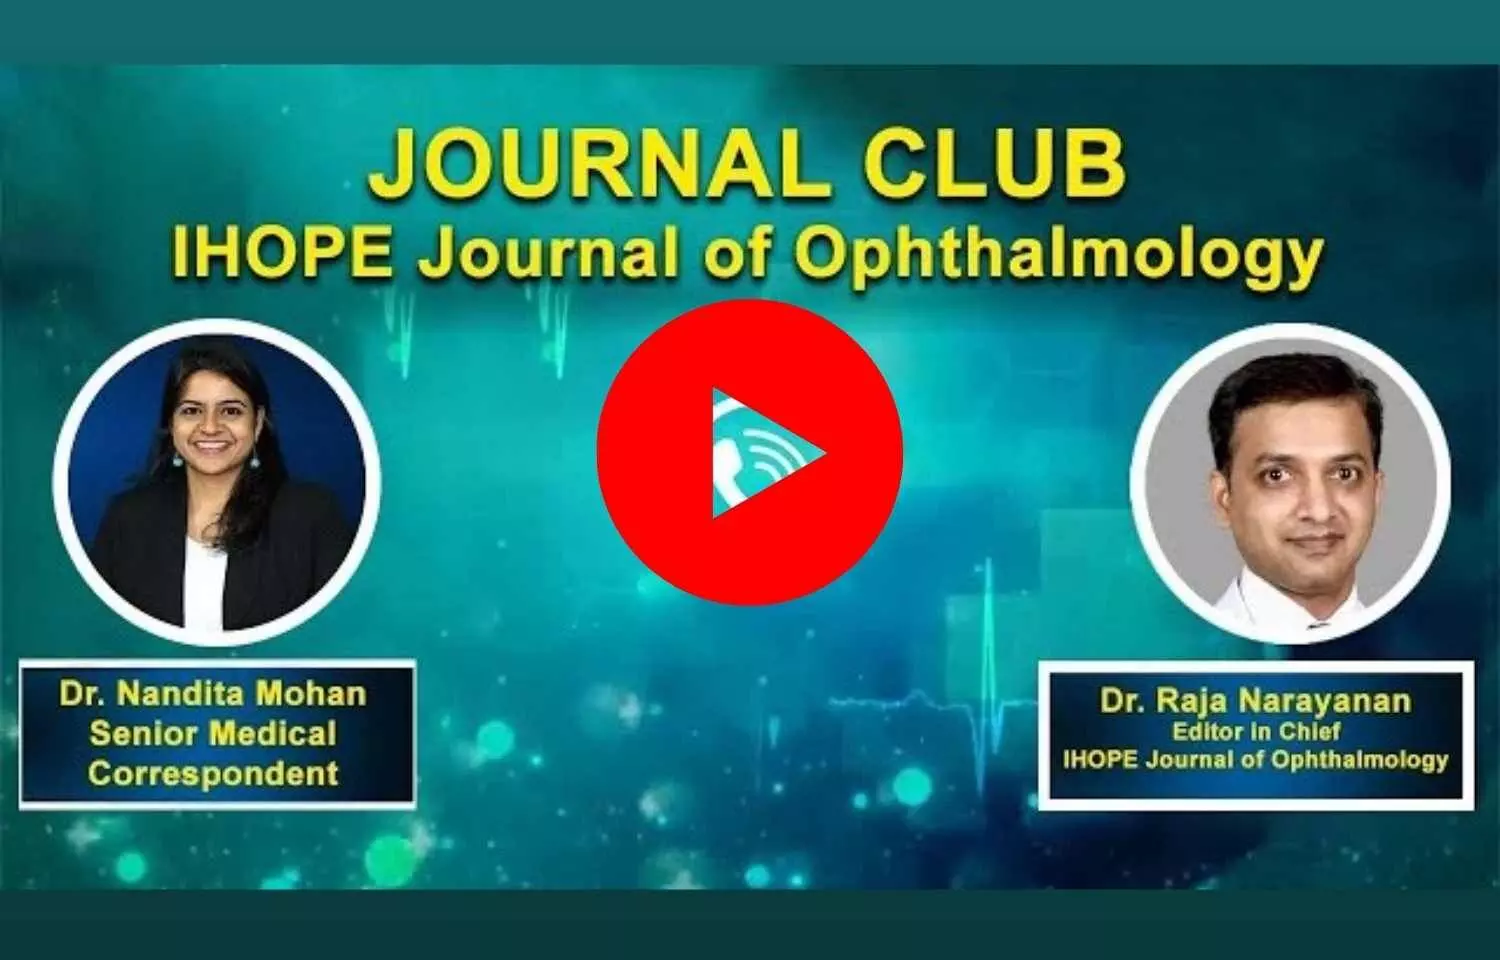 Know your Journal- The IHOPE Journal of Ophthalmology Ft. Dr. Raja Narayanan (Editor in Chief)